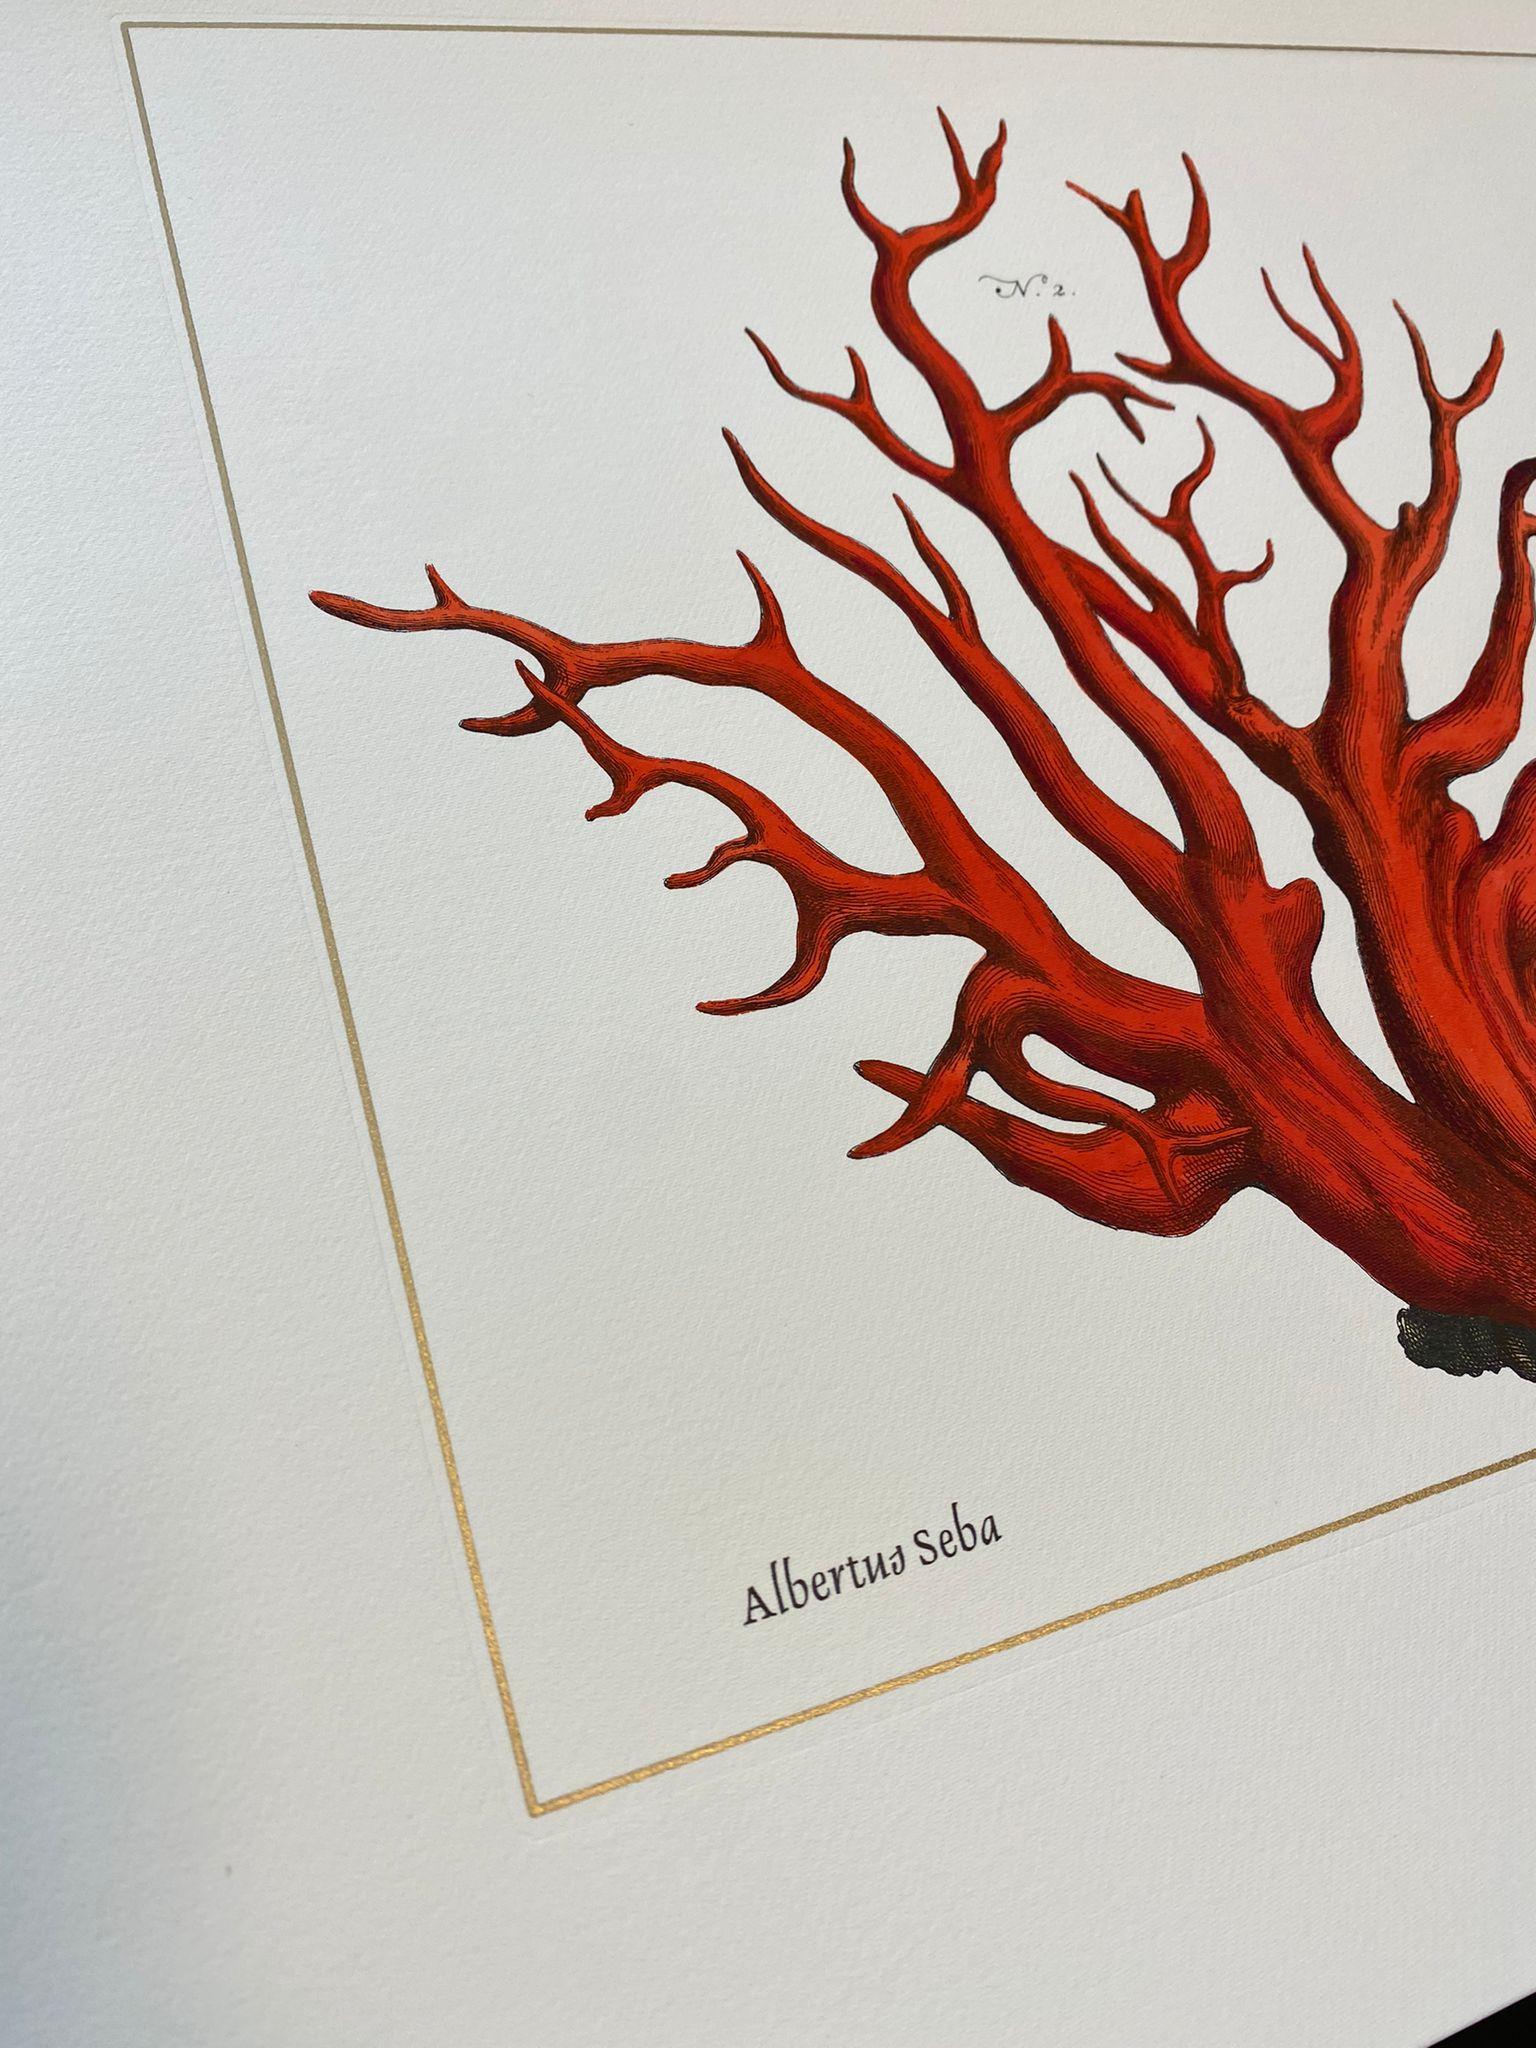 Elegant hand-watercoloured print representing Corallium Rubrum in red nuance, Image reproduced from the famous illustrations by Albertus Seba' Cabinet of Natural Curiosities.
These prints are available in 3 different representations and 2 colors,